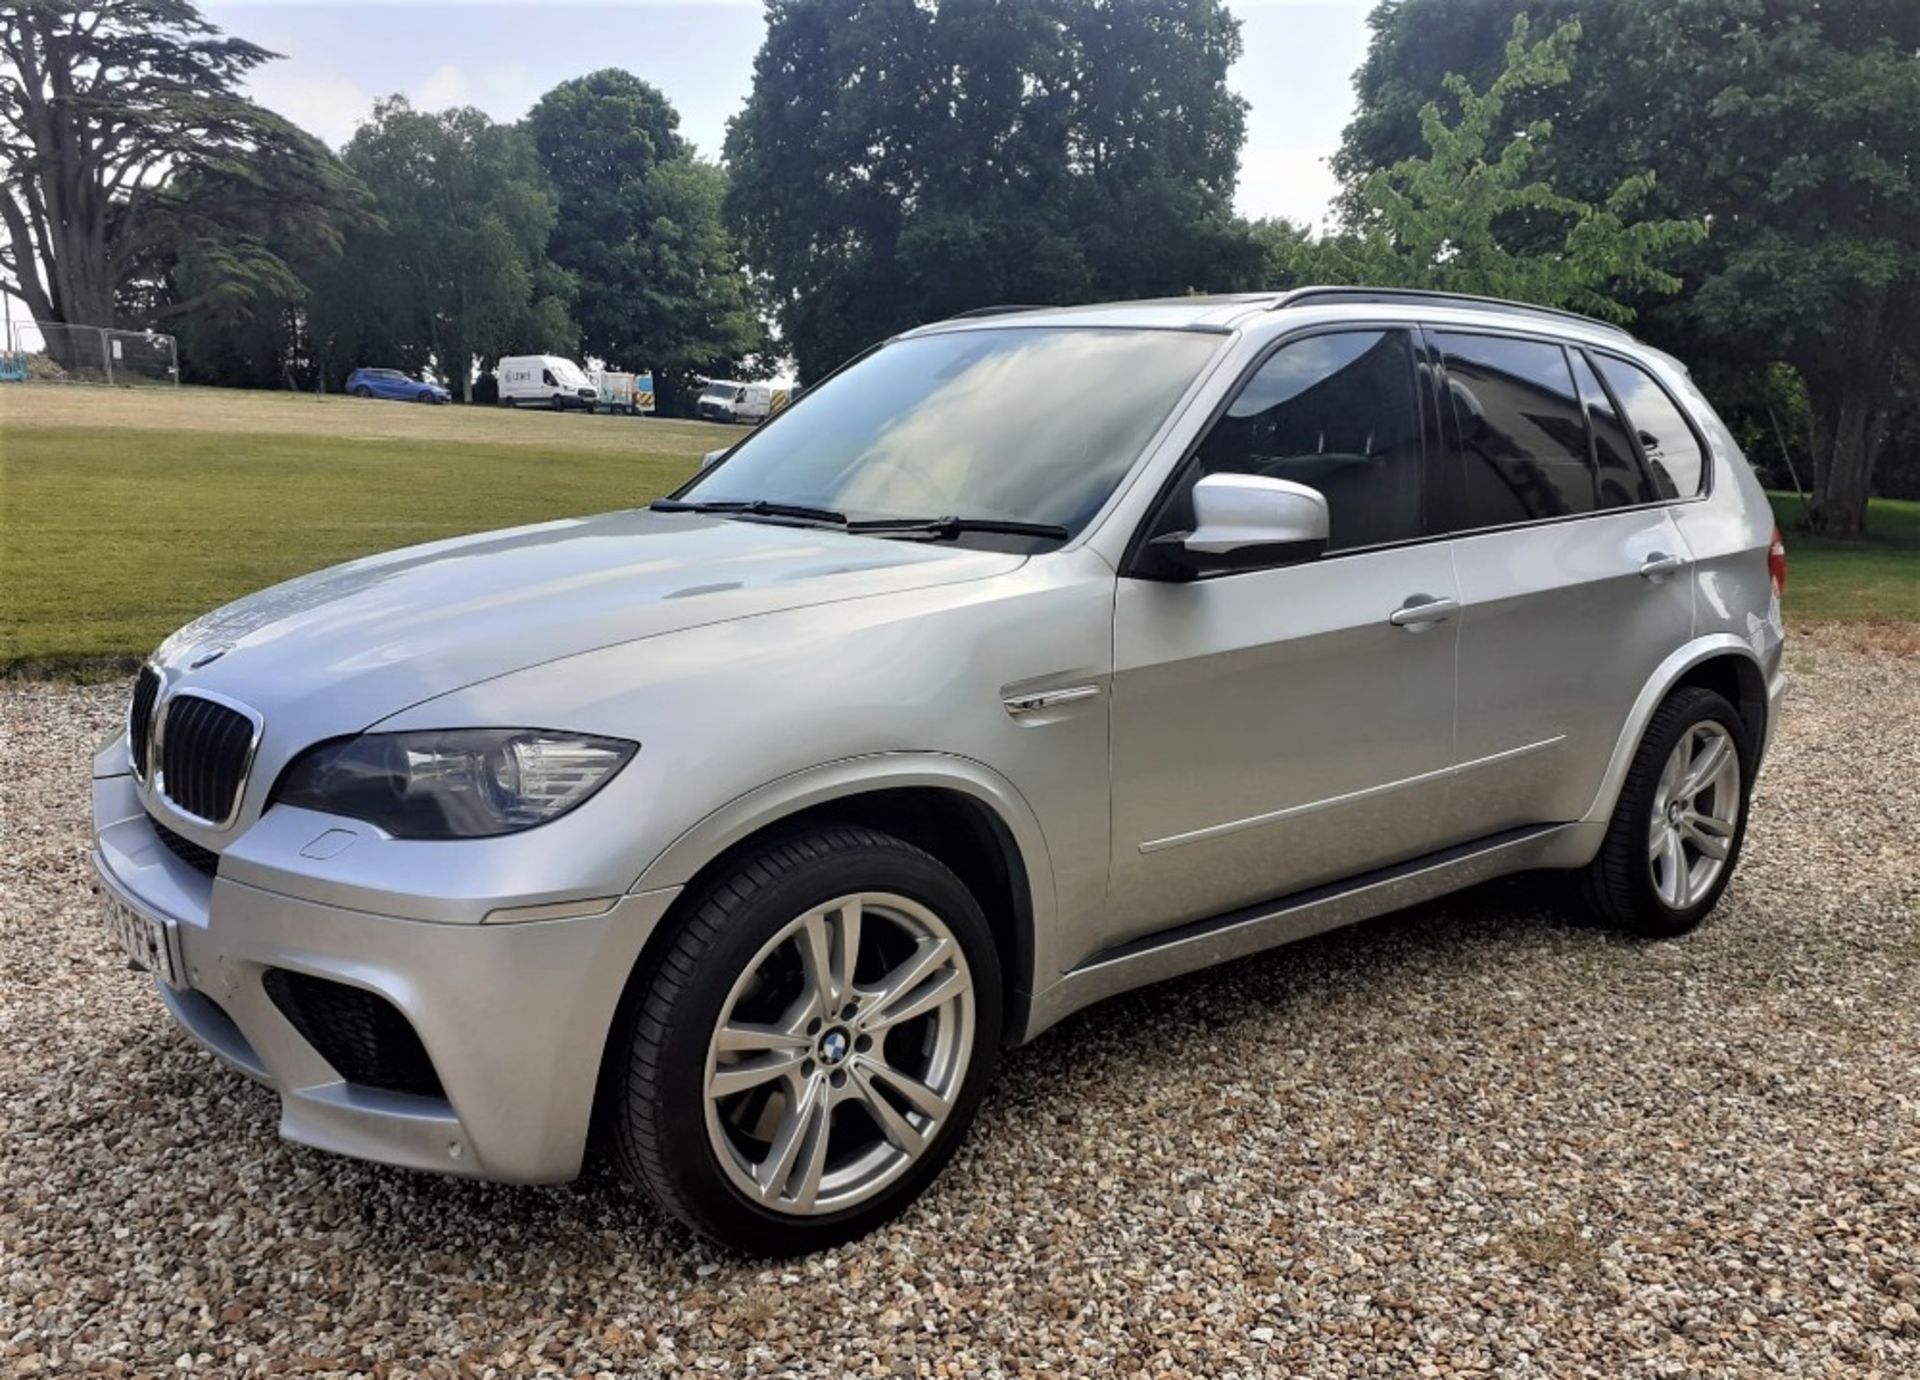 2009 BMW X5 M Registration Number:YH59 FFM Chassis Number: TBA Recorded Mileage: 125,000 miles - Two